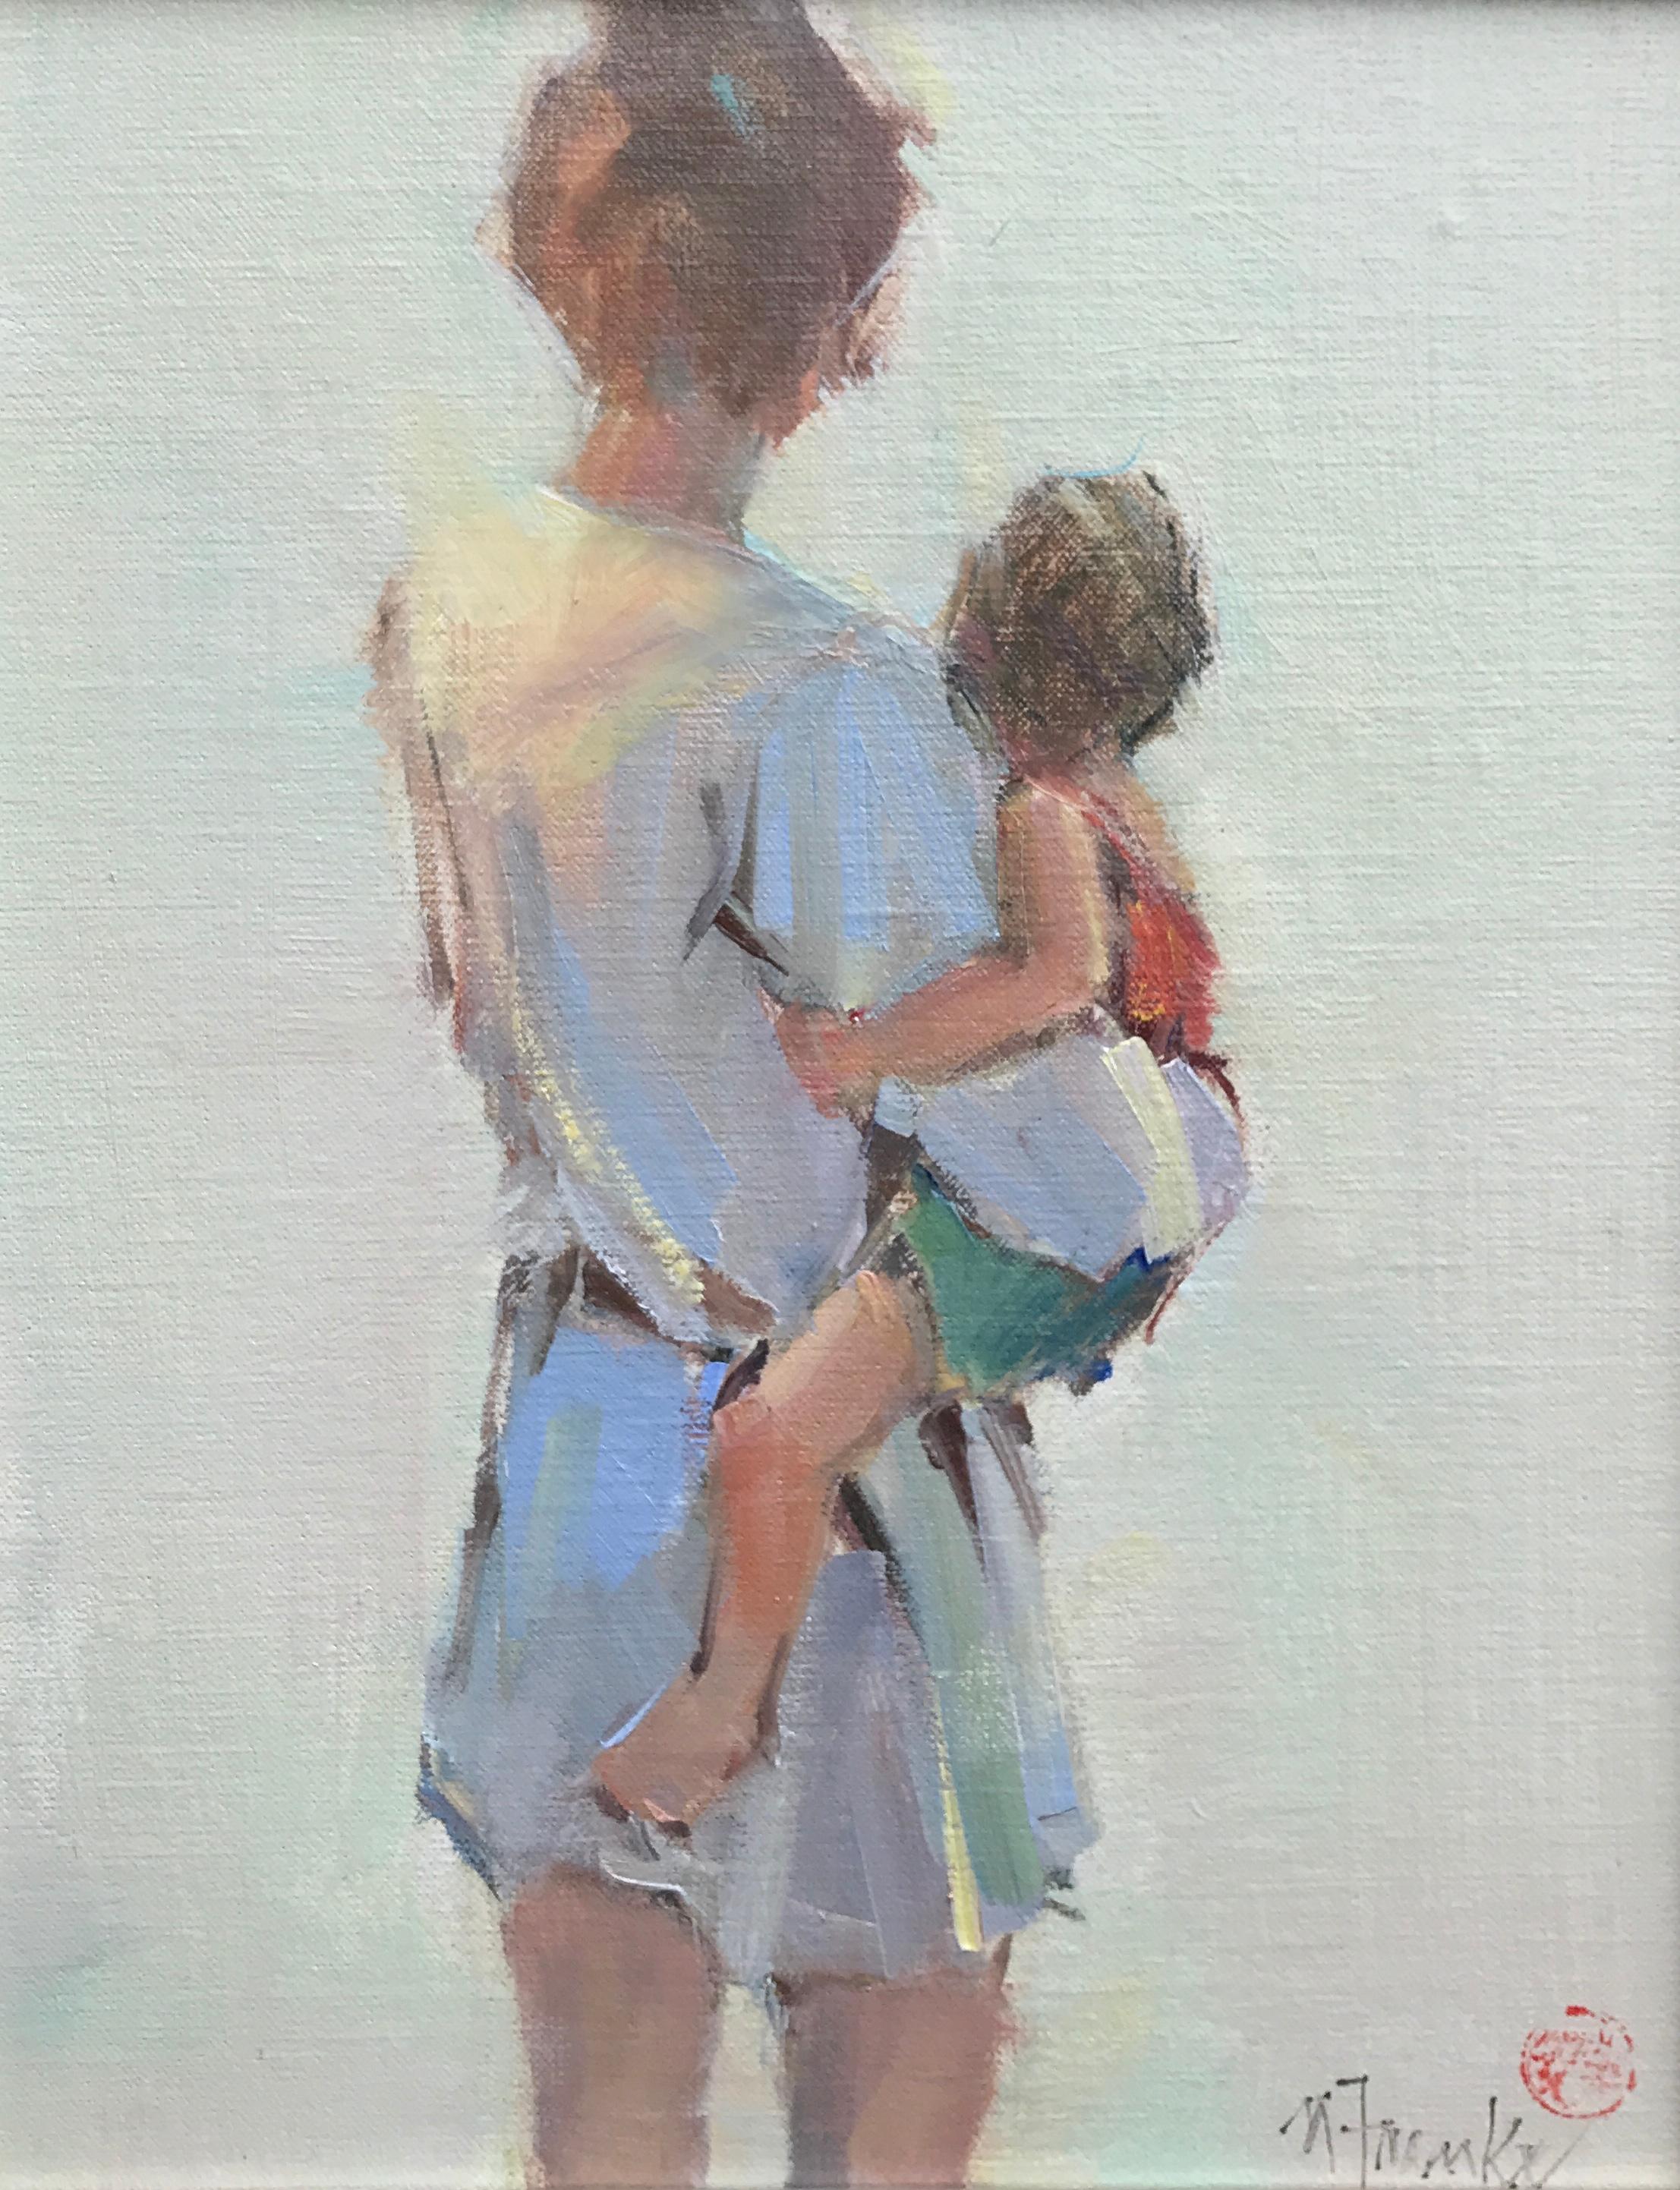 'Warmth' is a small framed figurative Impressionist oil on linen board painting of vertical format, created by American artist Nancy Franke in 2018. Featuring a soft palette mostly made of white, brown, blue, red and green tones, the painting